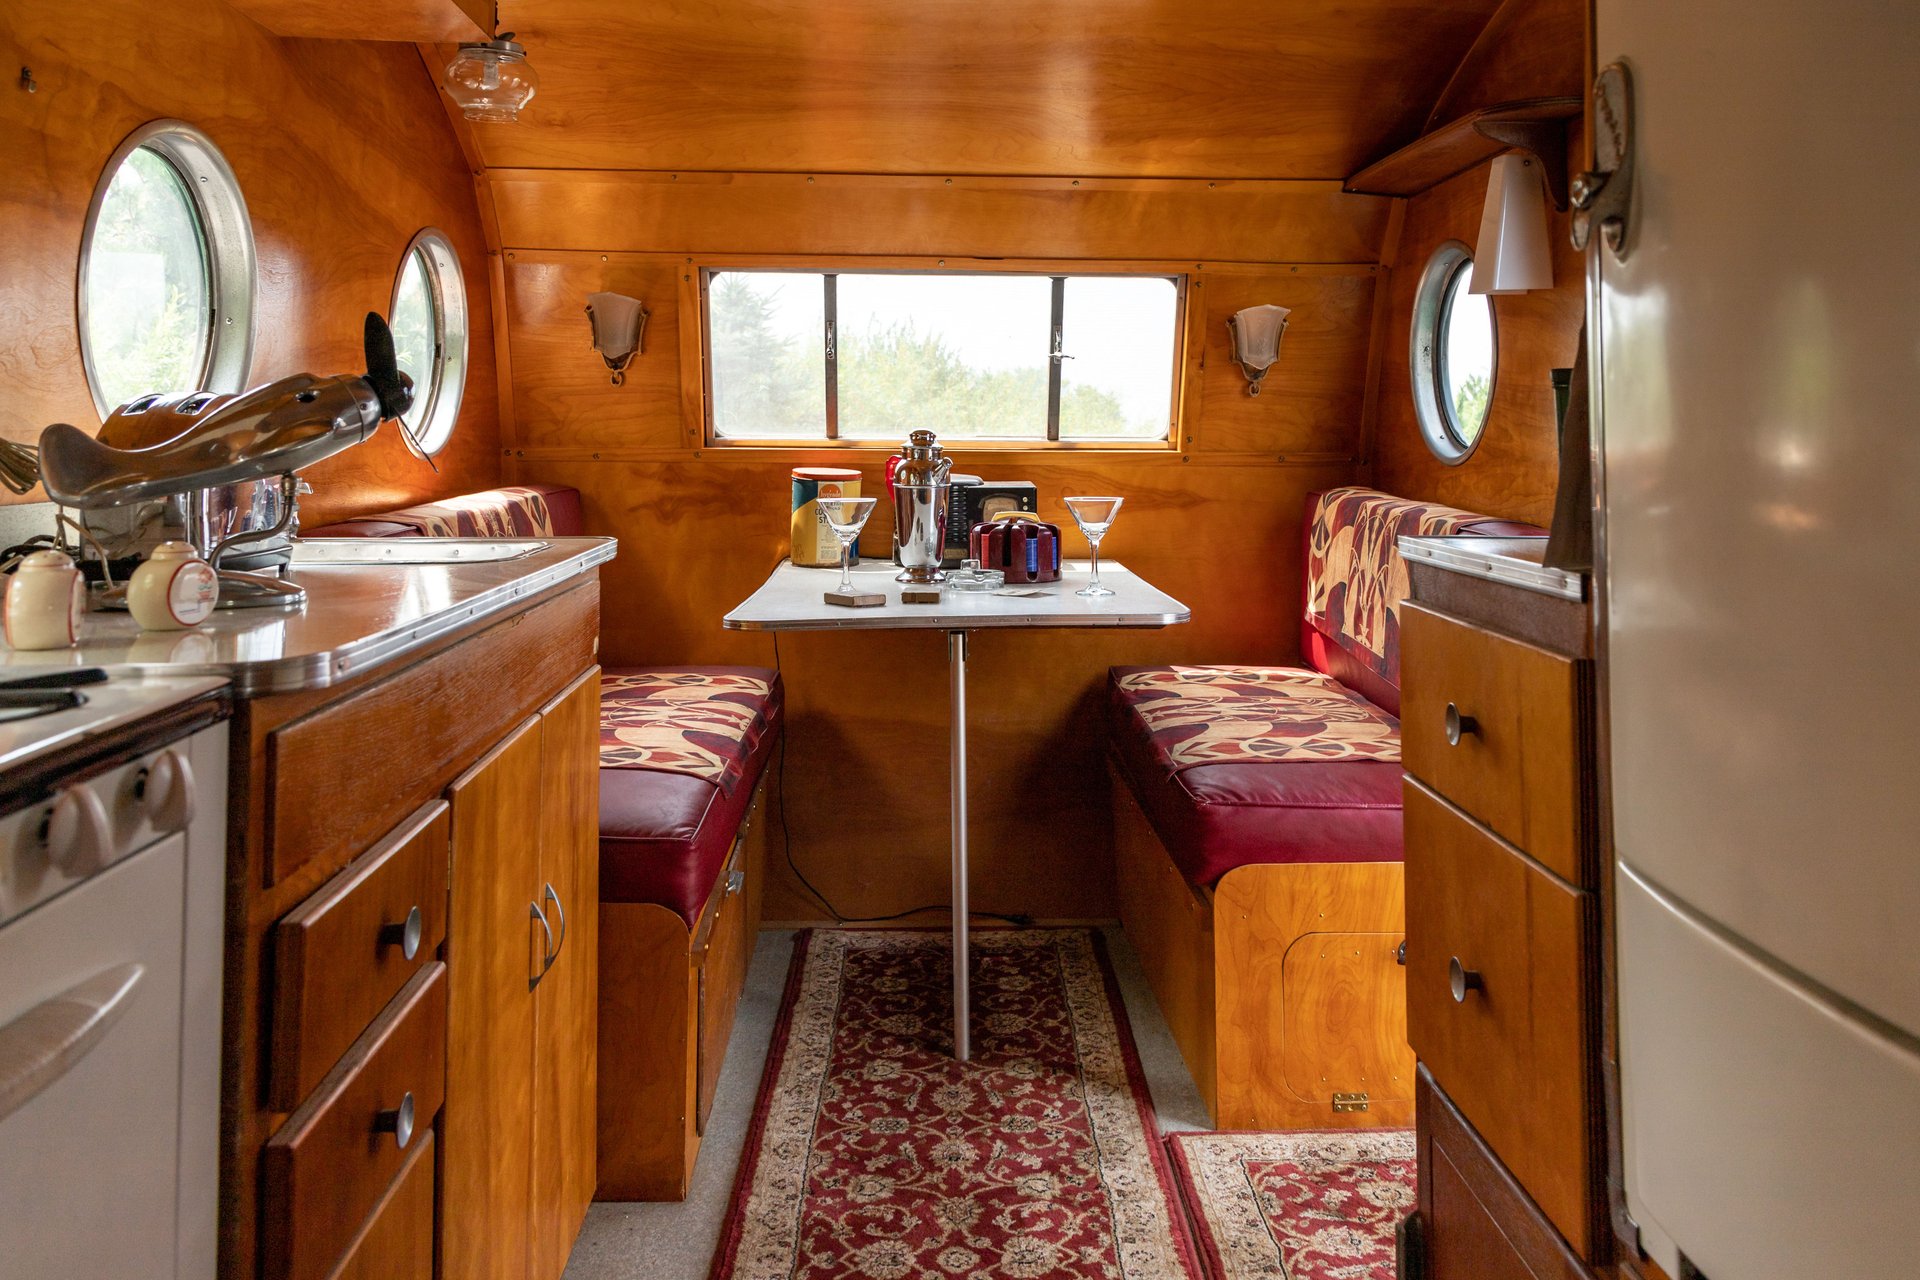 This 1953 Airfloat Navigator Is An Affordable Vintage Camper With A